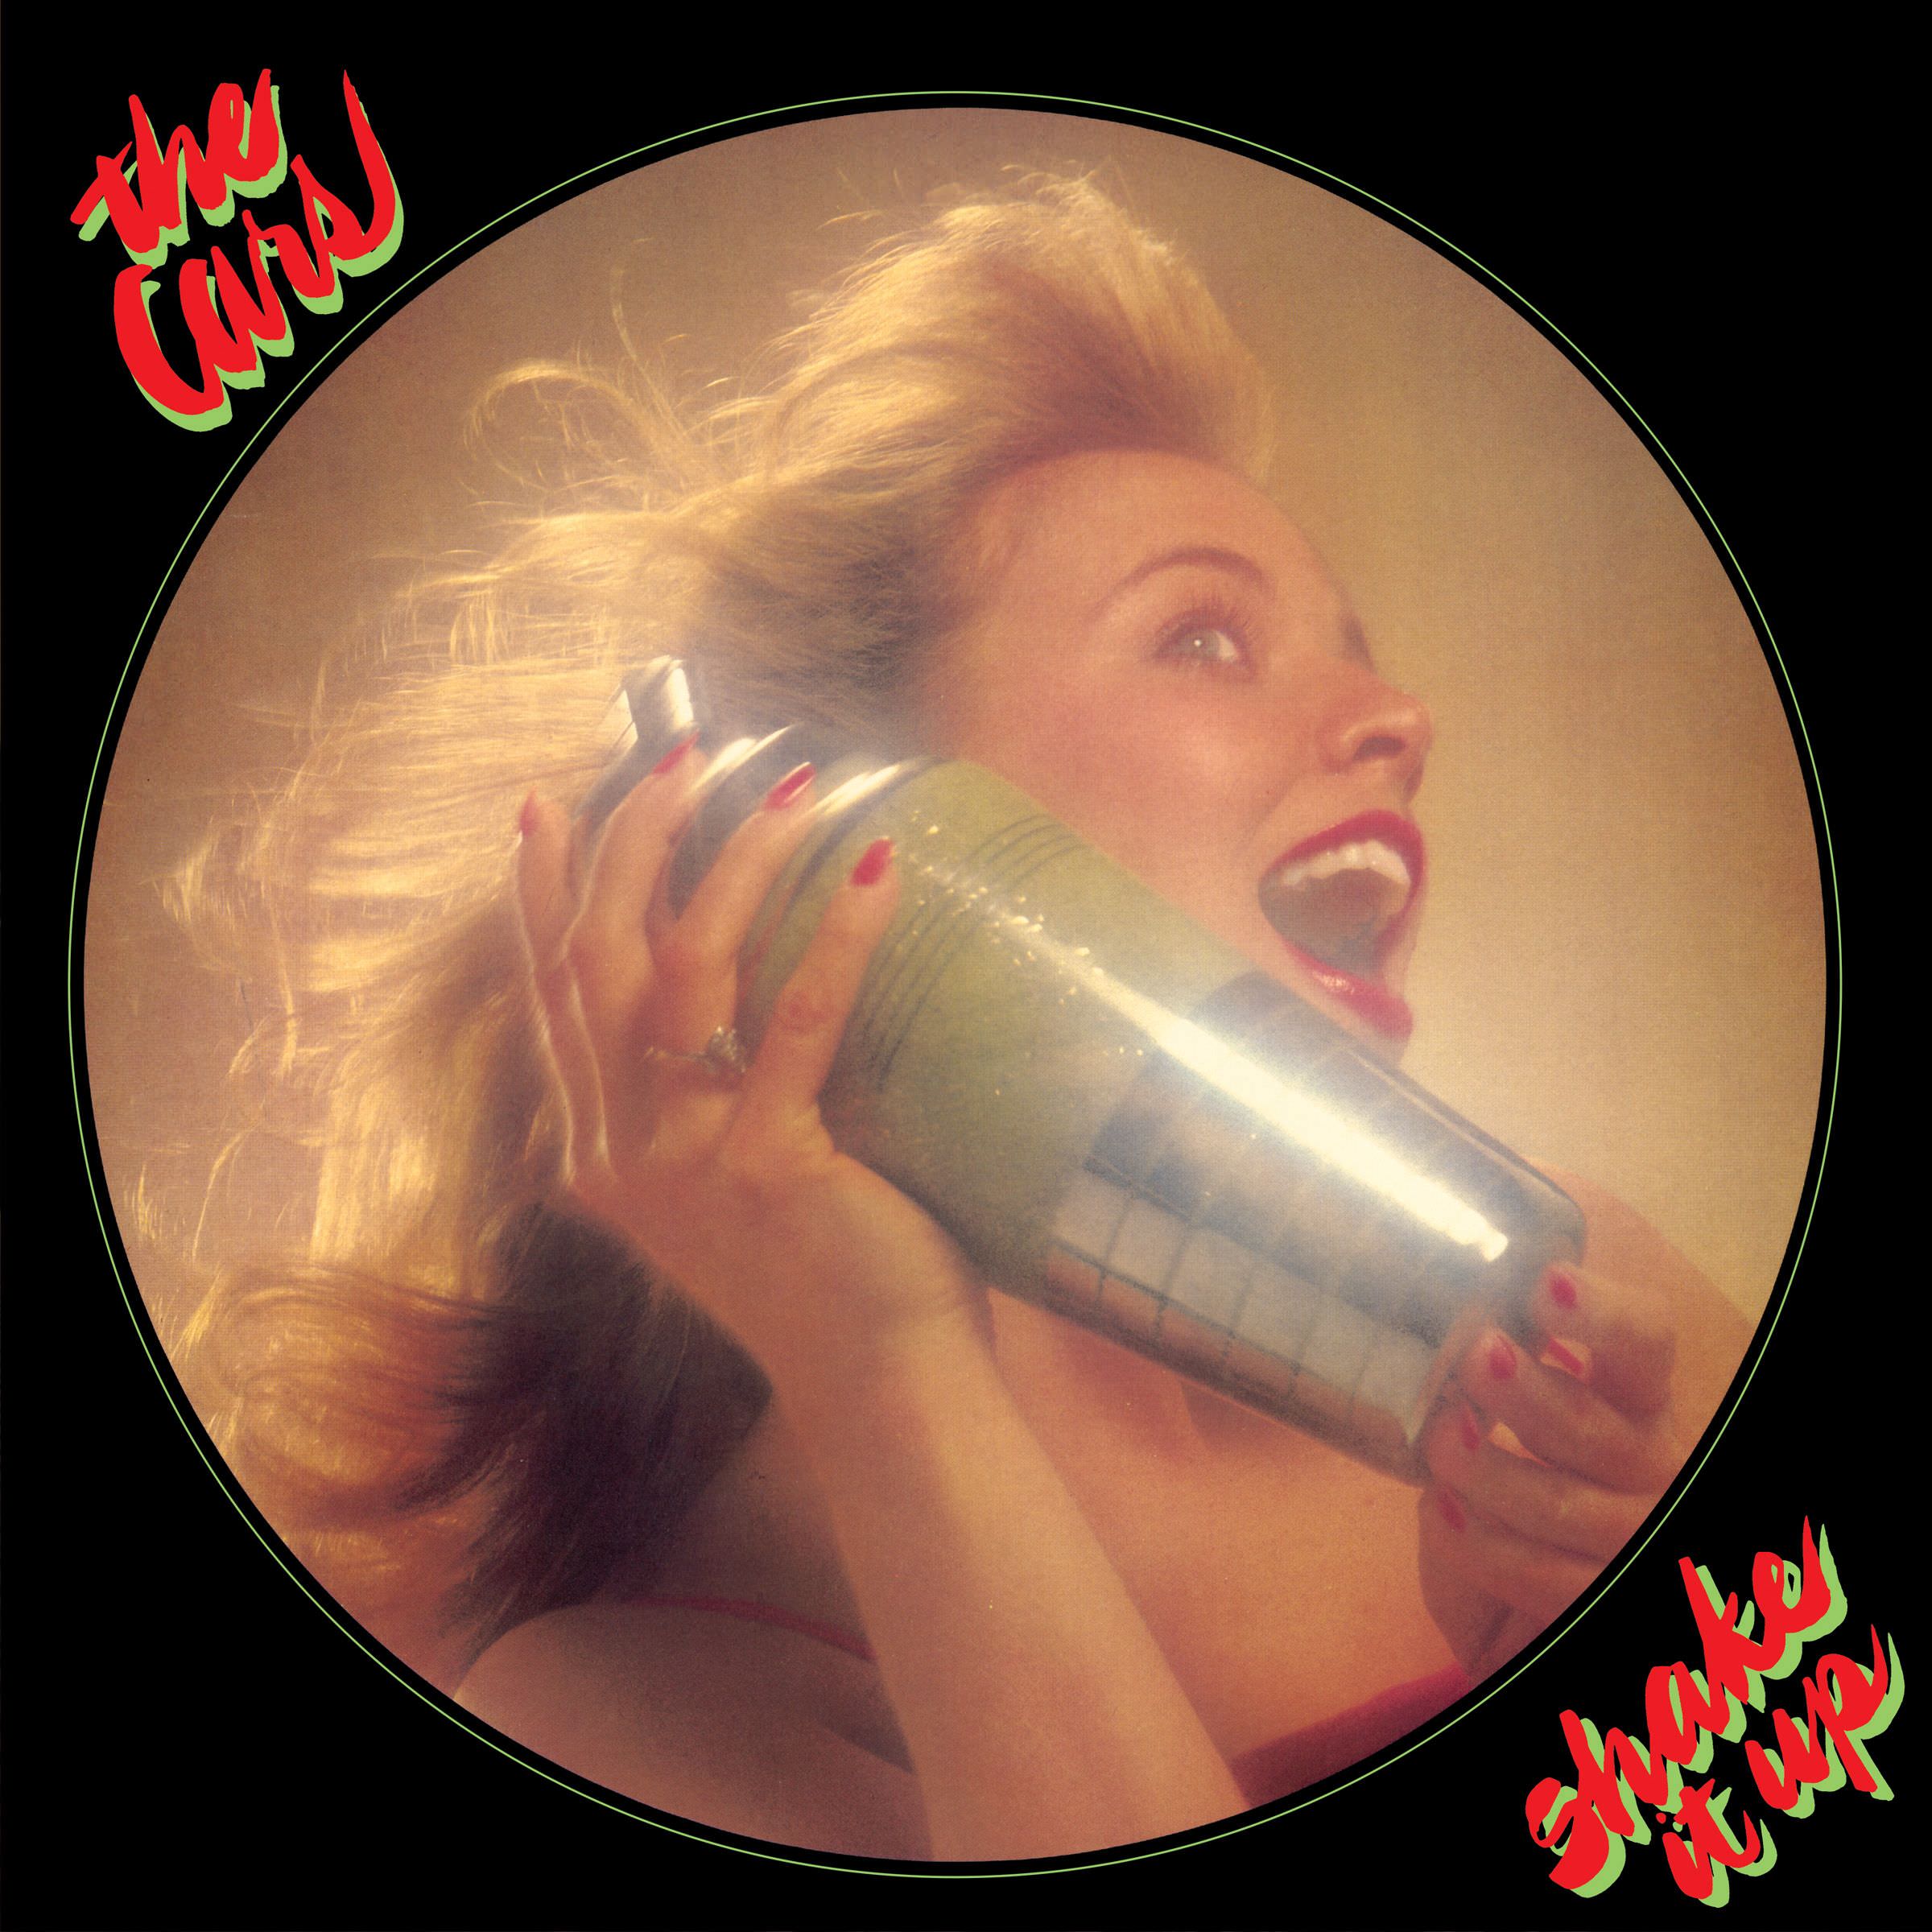 The Cars - Shake It Up (1981) [Expanded Edition 2018] [HDTracks FLAC 24bit/192kHz]